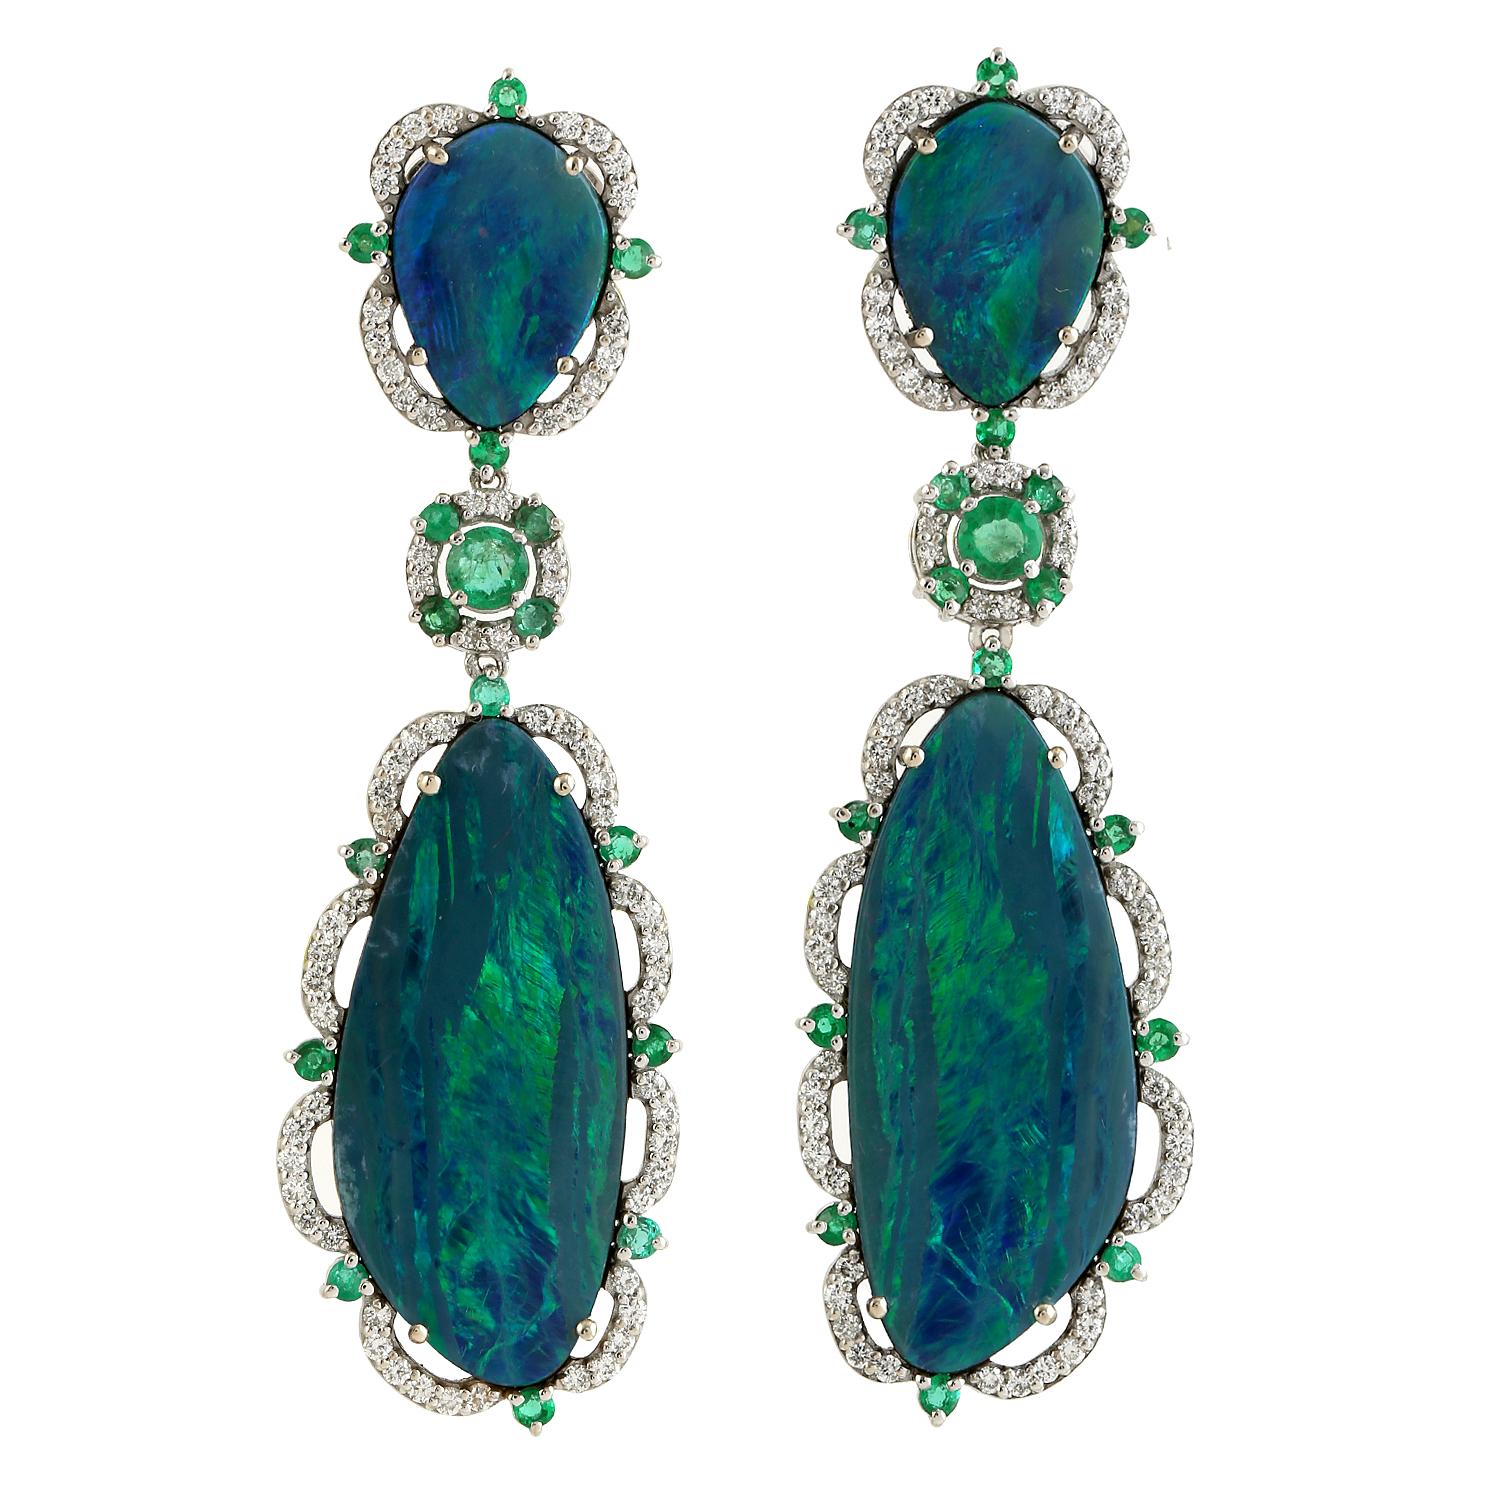 Contemporary Multi Shaped Doublet Opal Earrings Accented With Diamonds Made In 18k White Gold For Sale